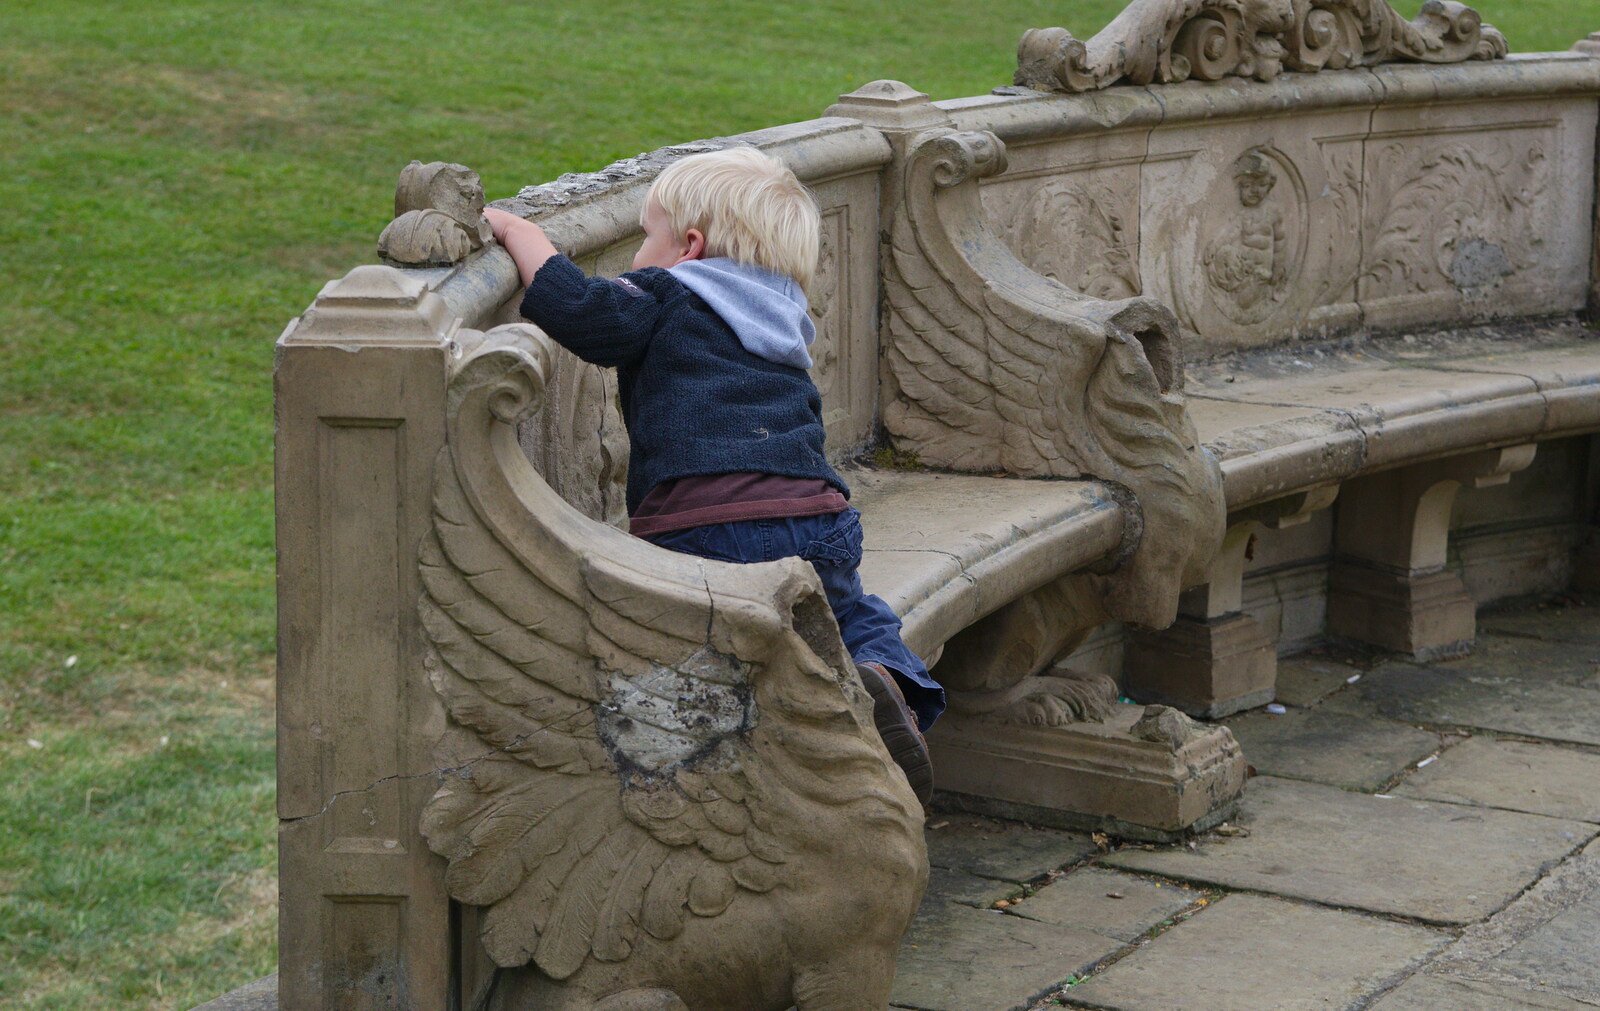 Harry climbs on a stone bench from Isobel's Race For Life, Chantry Park, Ipswich - 11th June 2014